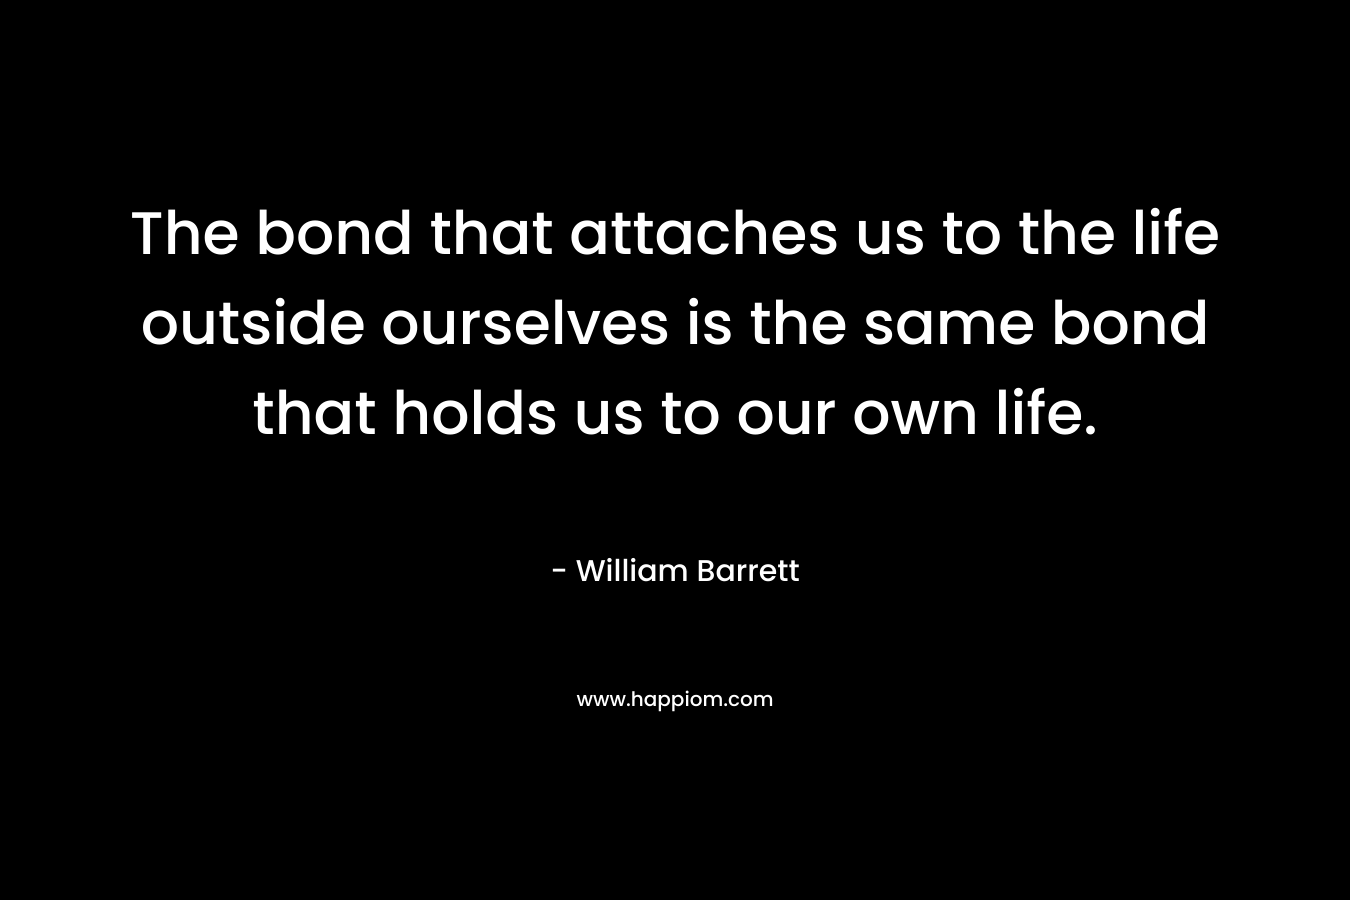 The bond that attaches us to the life outside ourselves is the same bond that holds us to our own life.